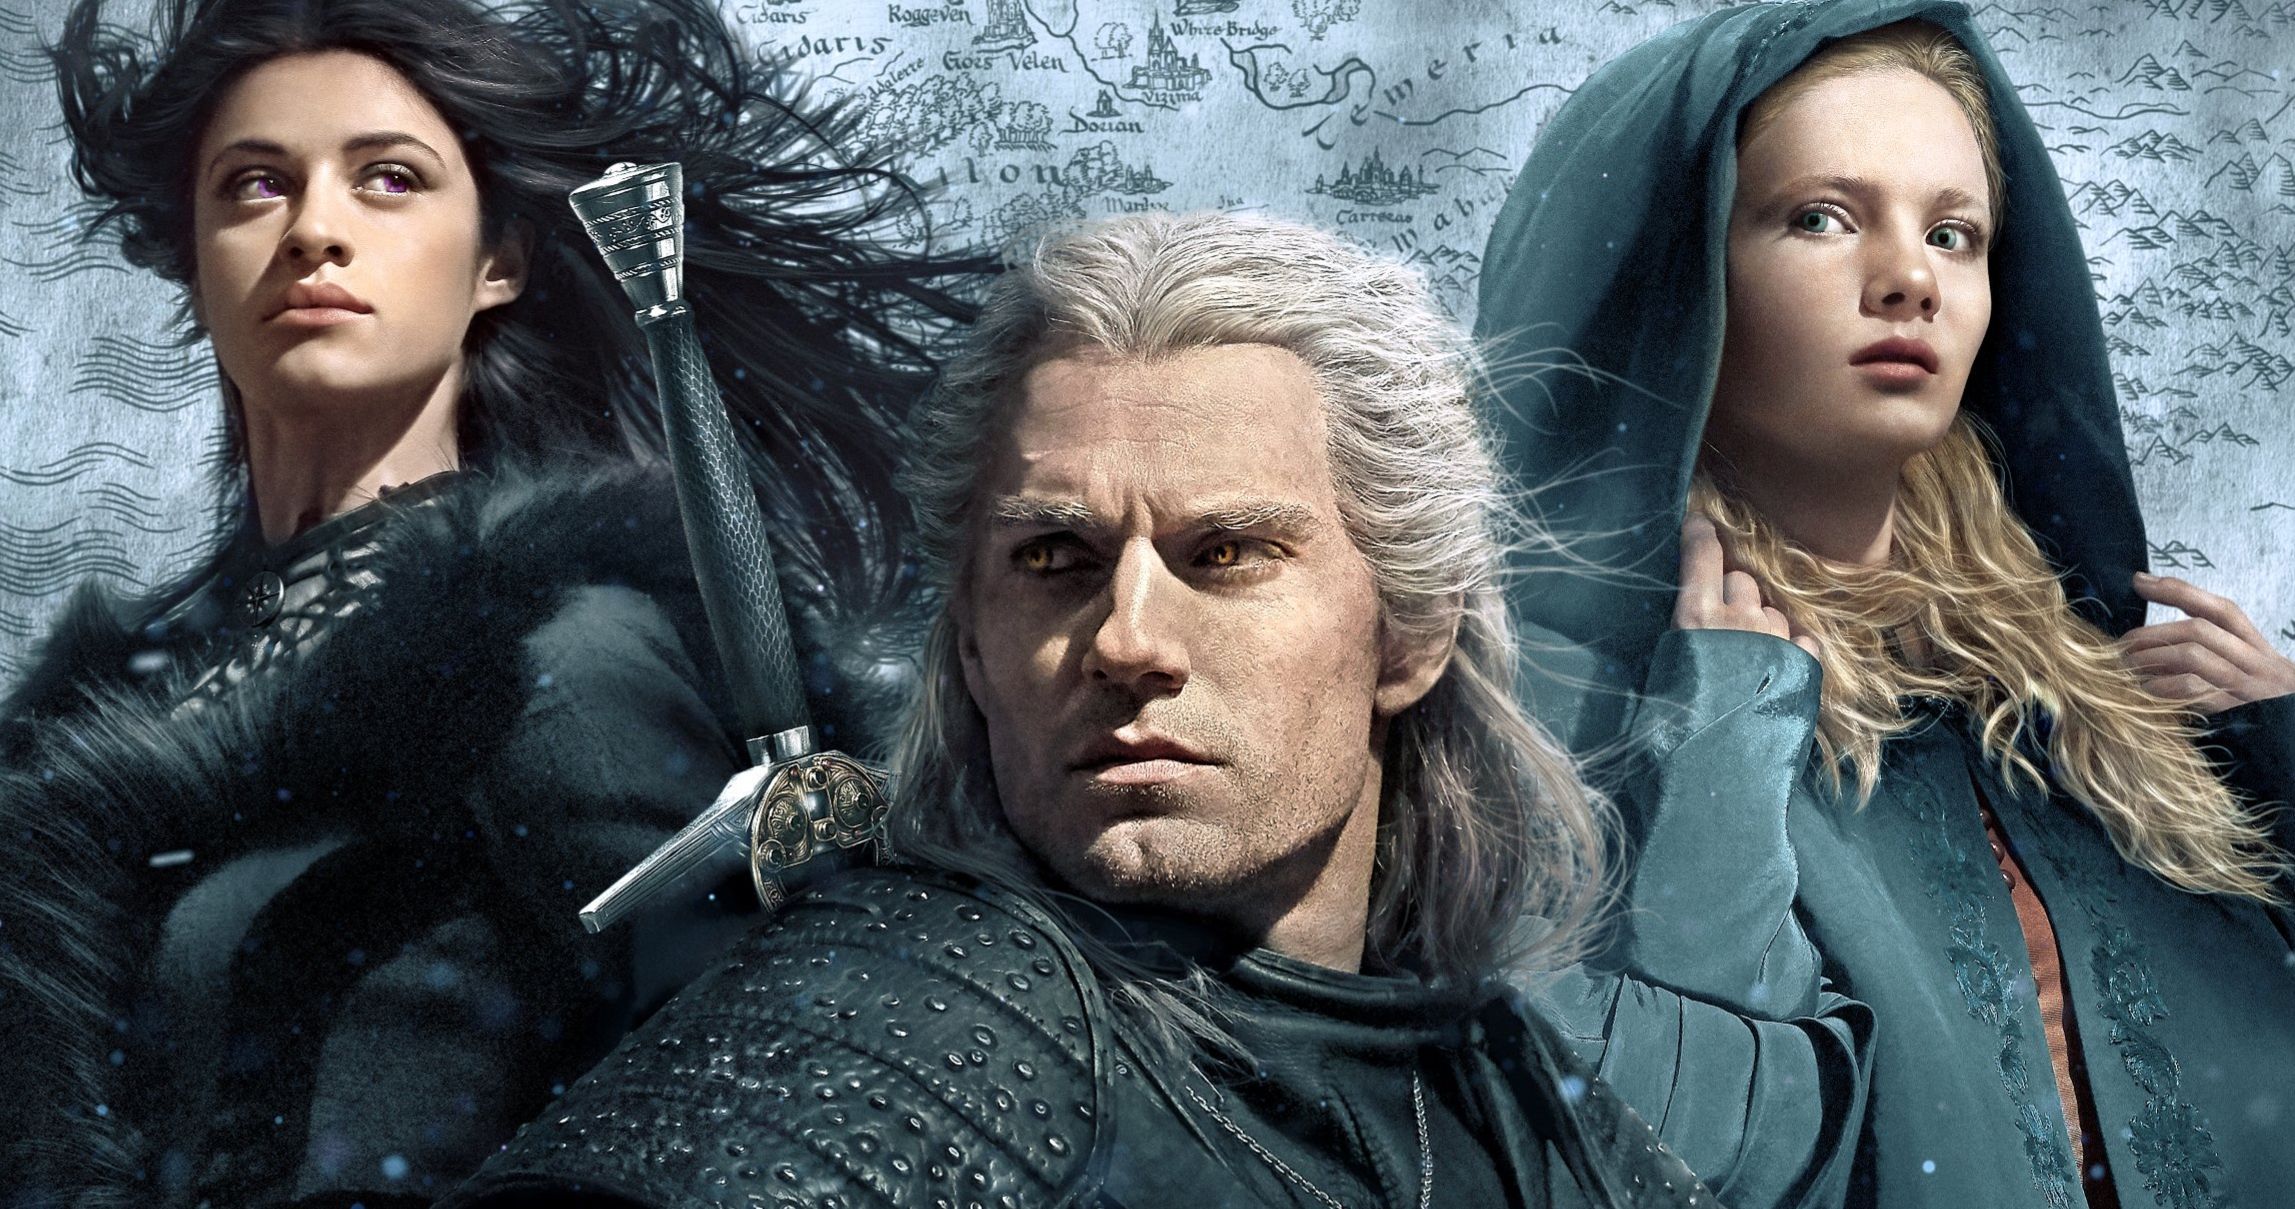 The Witcher Creator Shares True Thoughts on Henry Cavill's Netflix Series